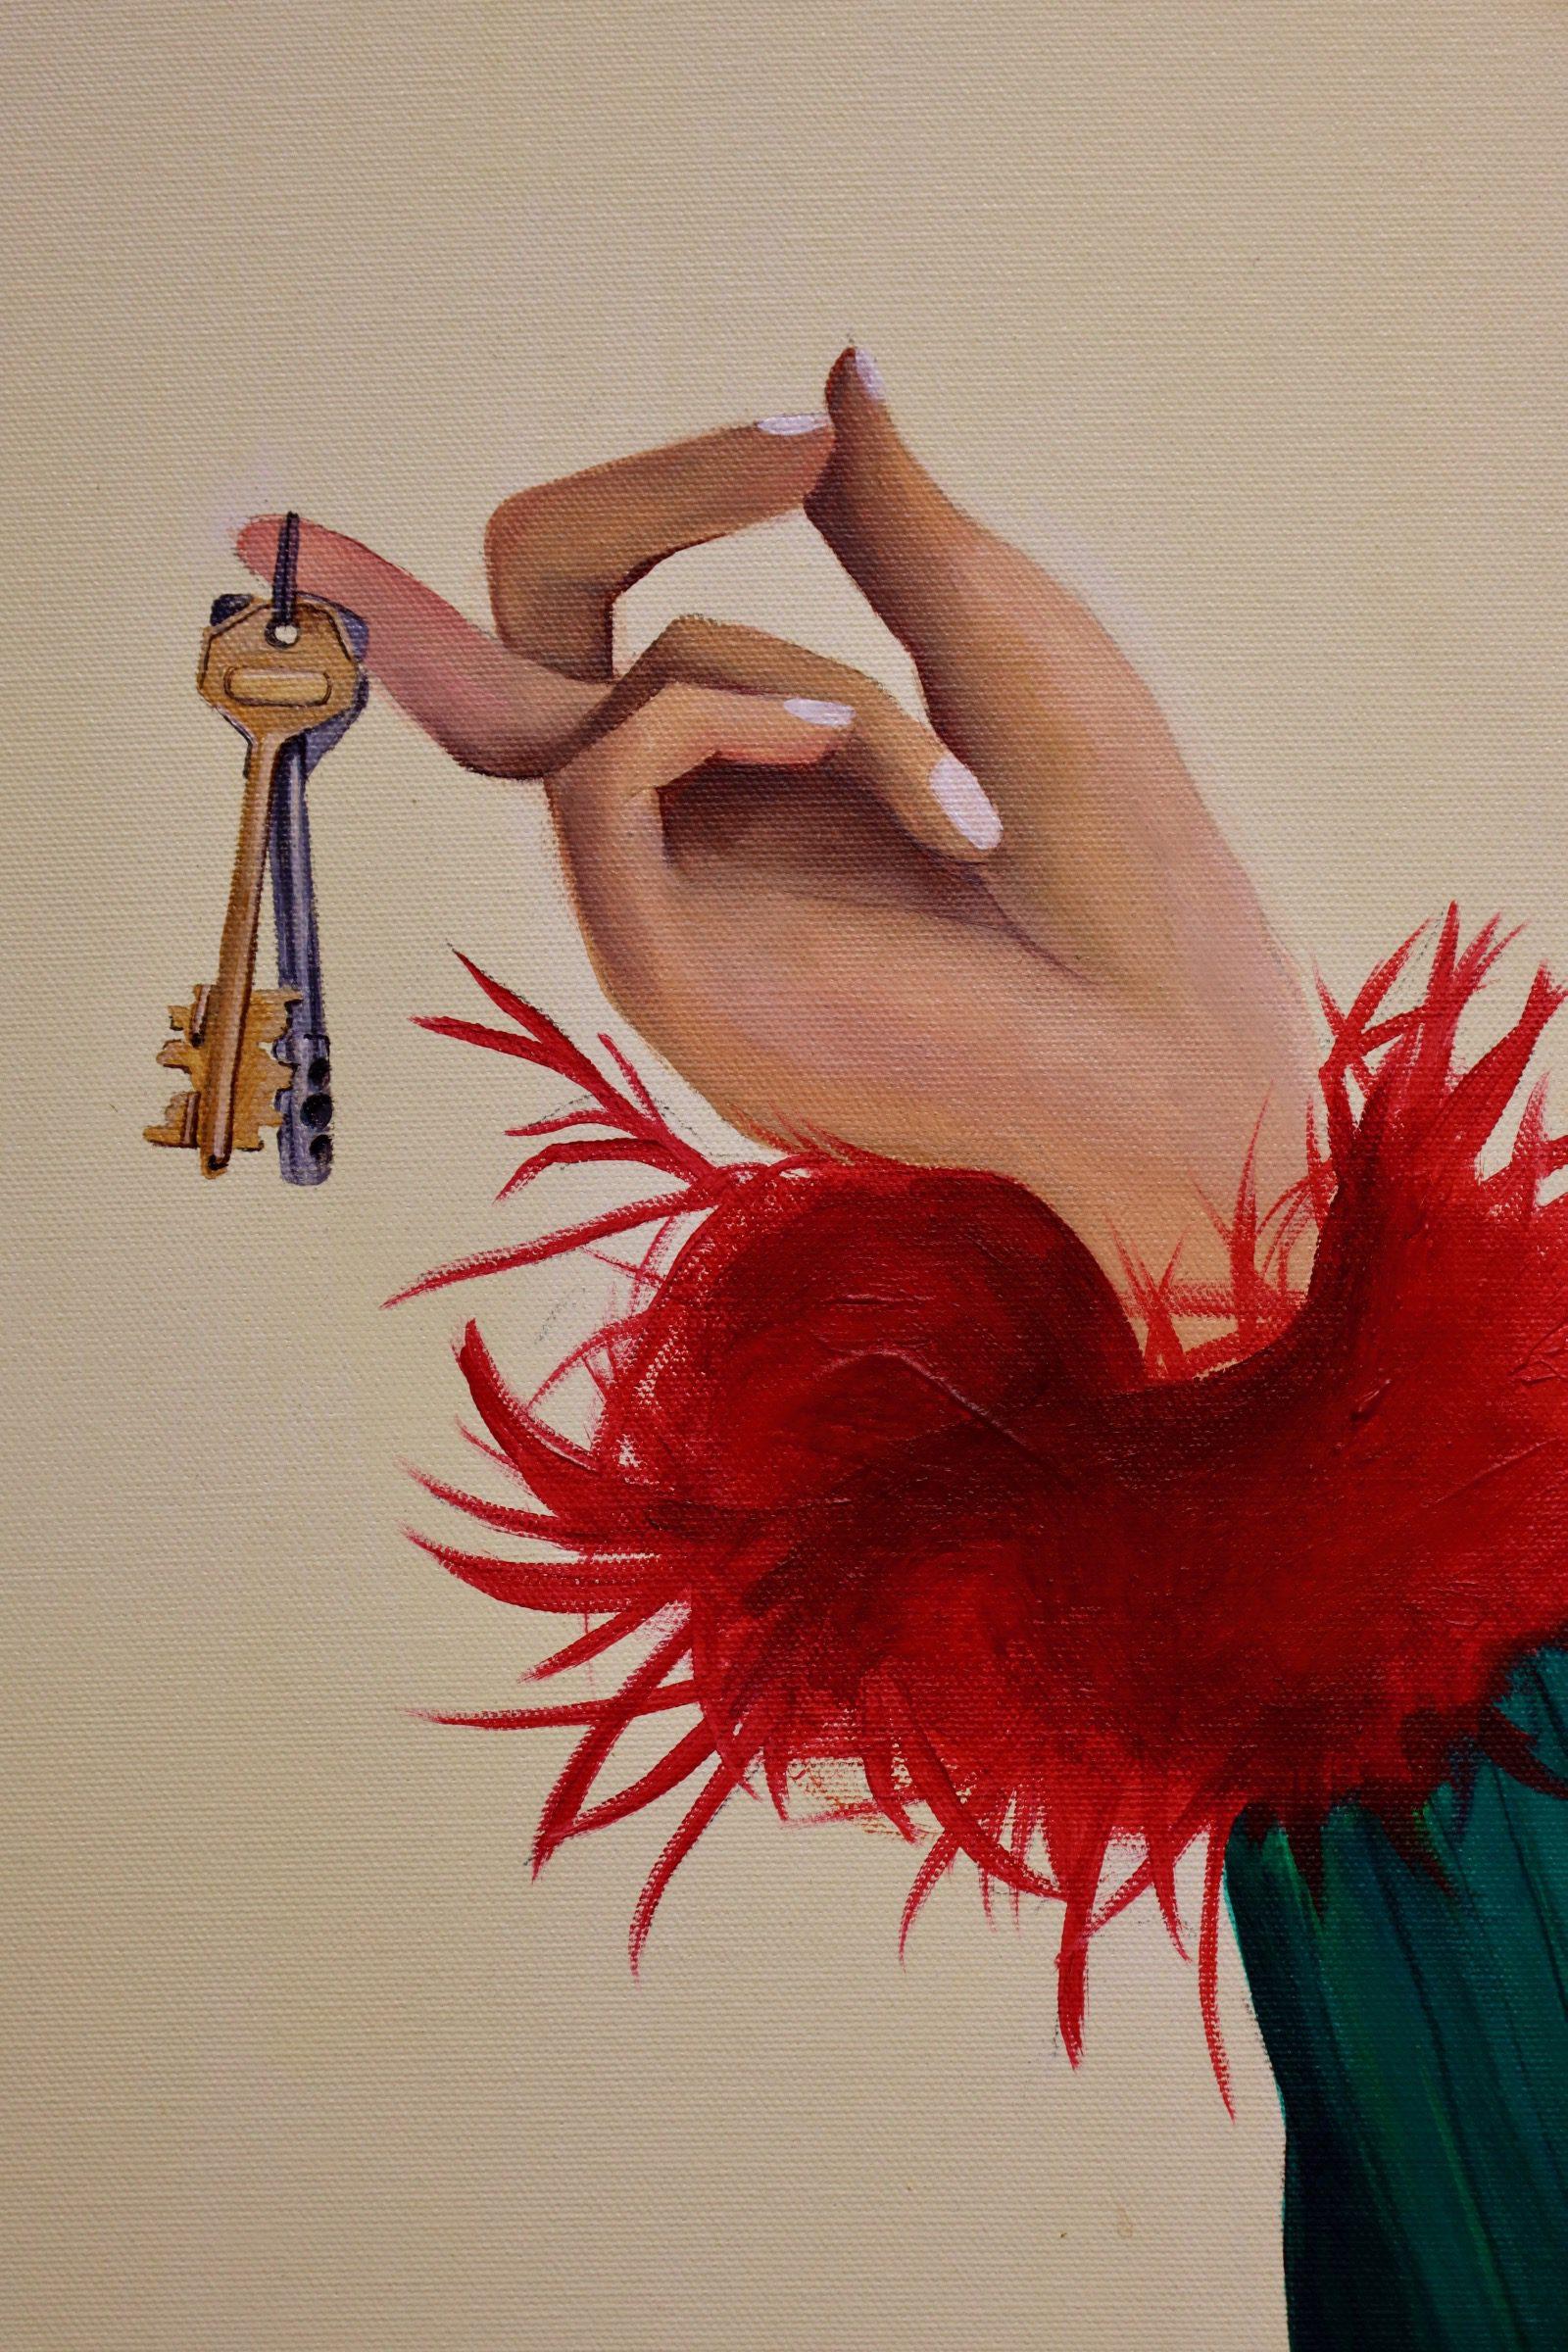 Eva Carzul’s artwork, “The Glory of Real Estate,” ingeniously infuses humor as the artist shares her personal experiences with the viewer. With one hand clutching keys to an undisclosed property, she perches upon a photorealistic corn cob, while